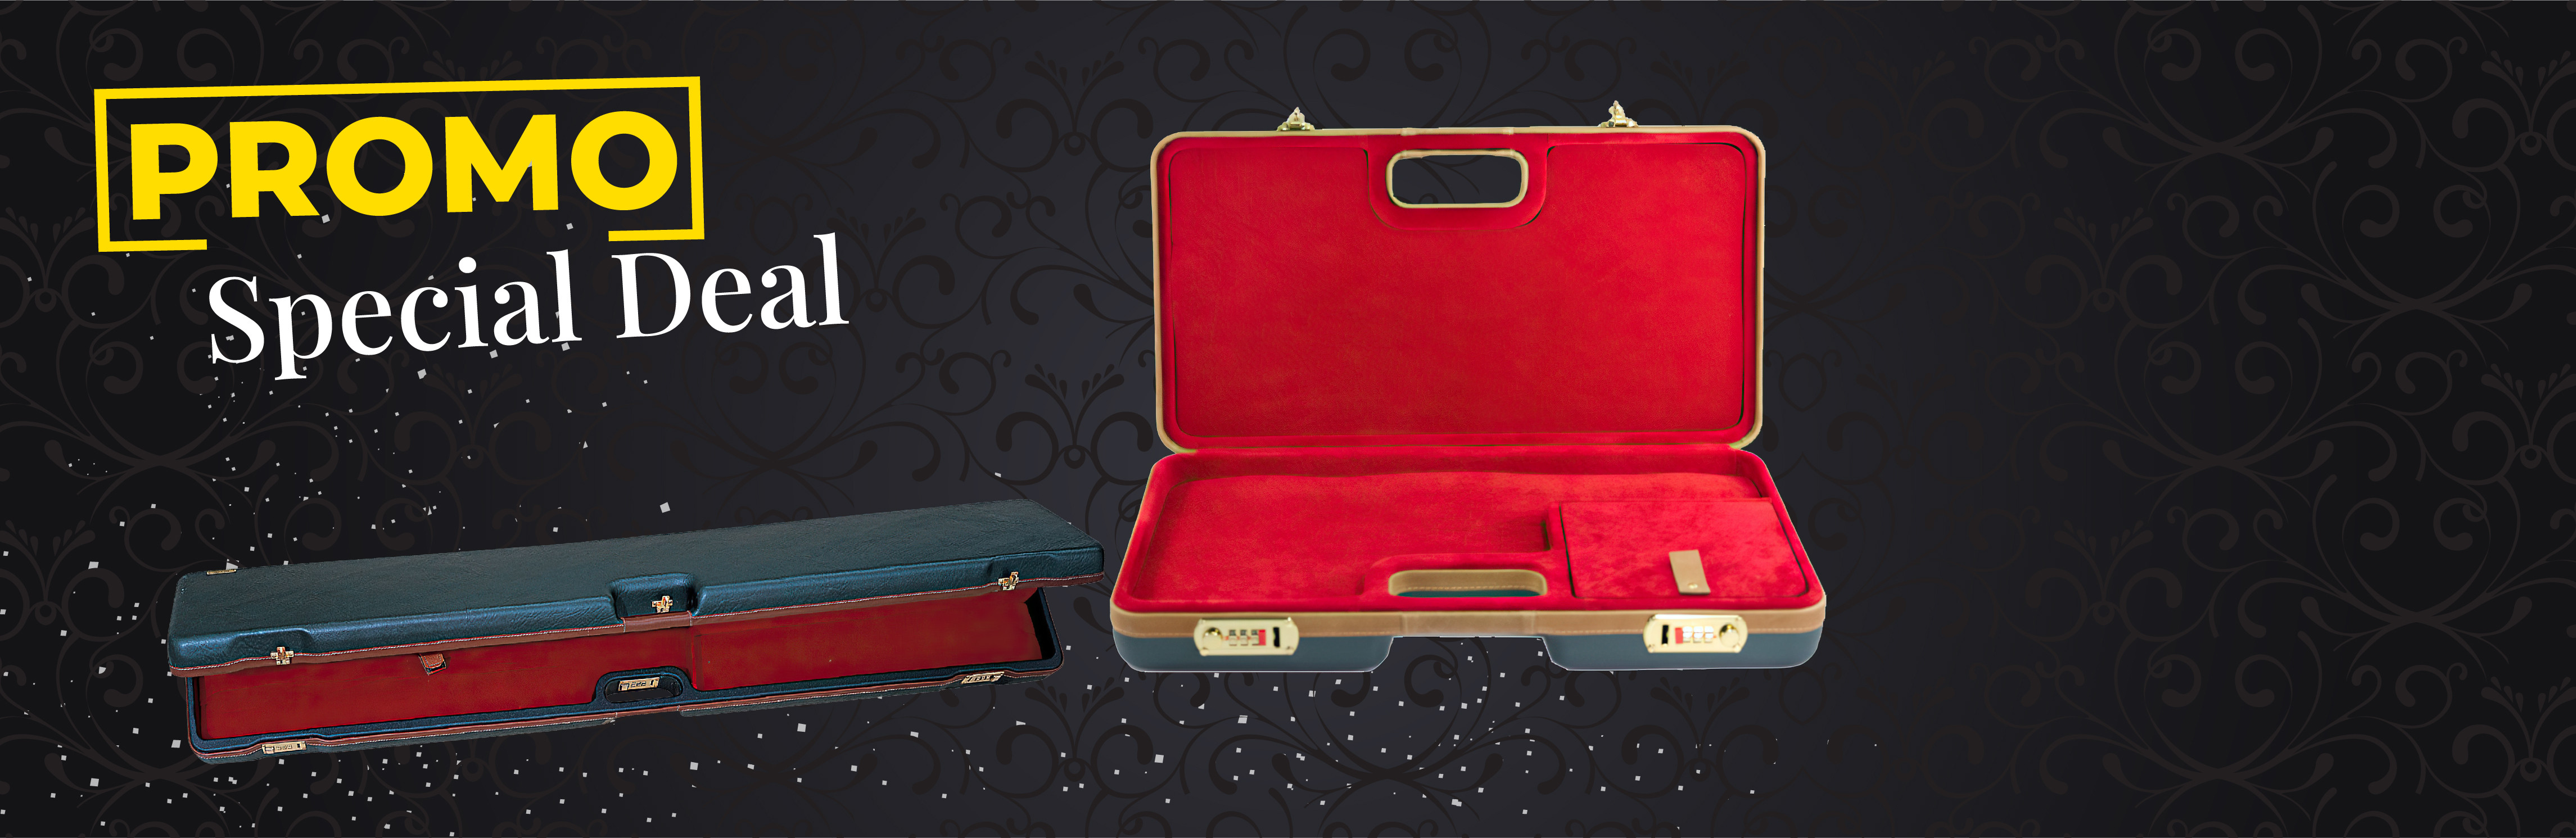 Rifle and pistol case